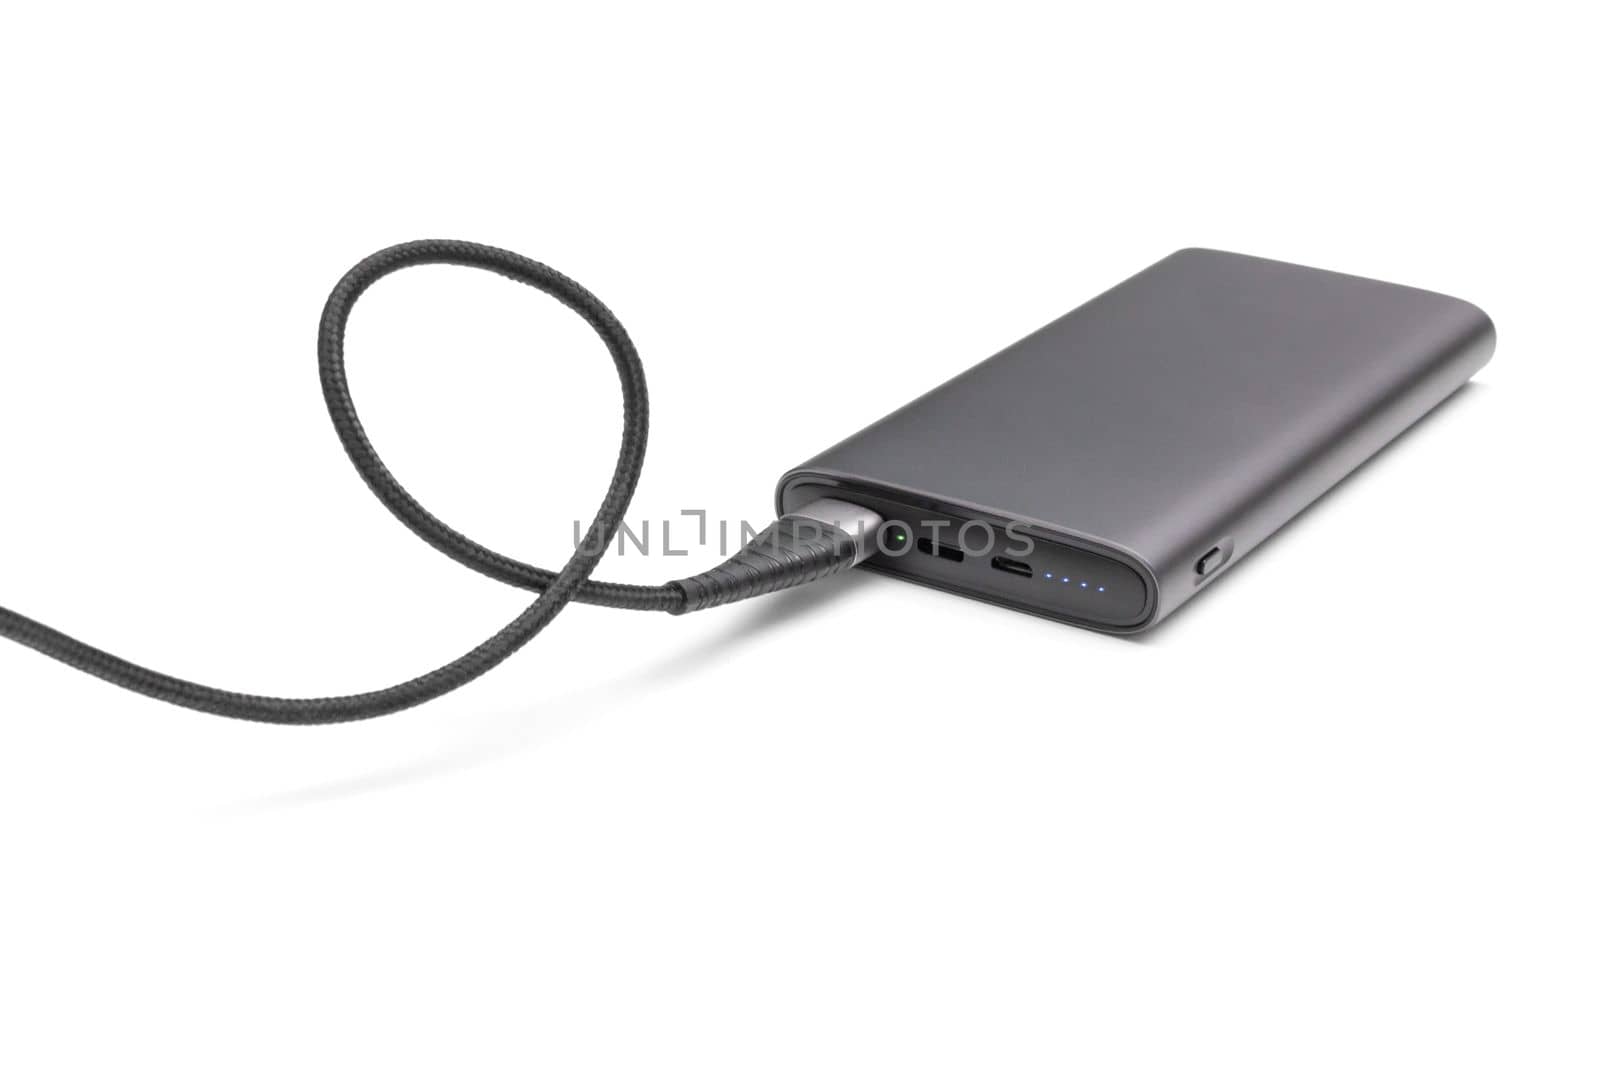 Fully charged portable powerbank with cable and two usb outputs isolated on a white background. Powerbank for charging mobile devices.